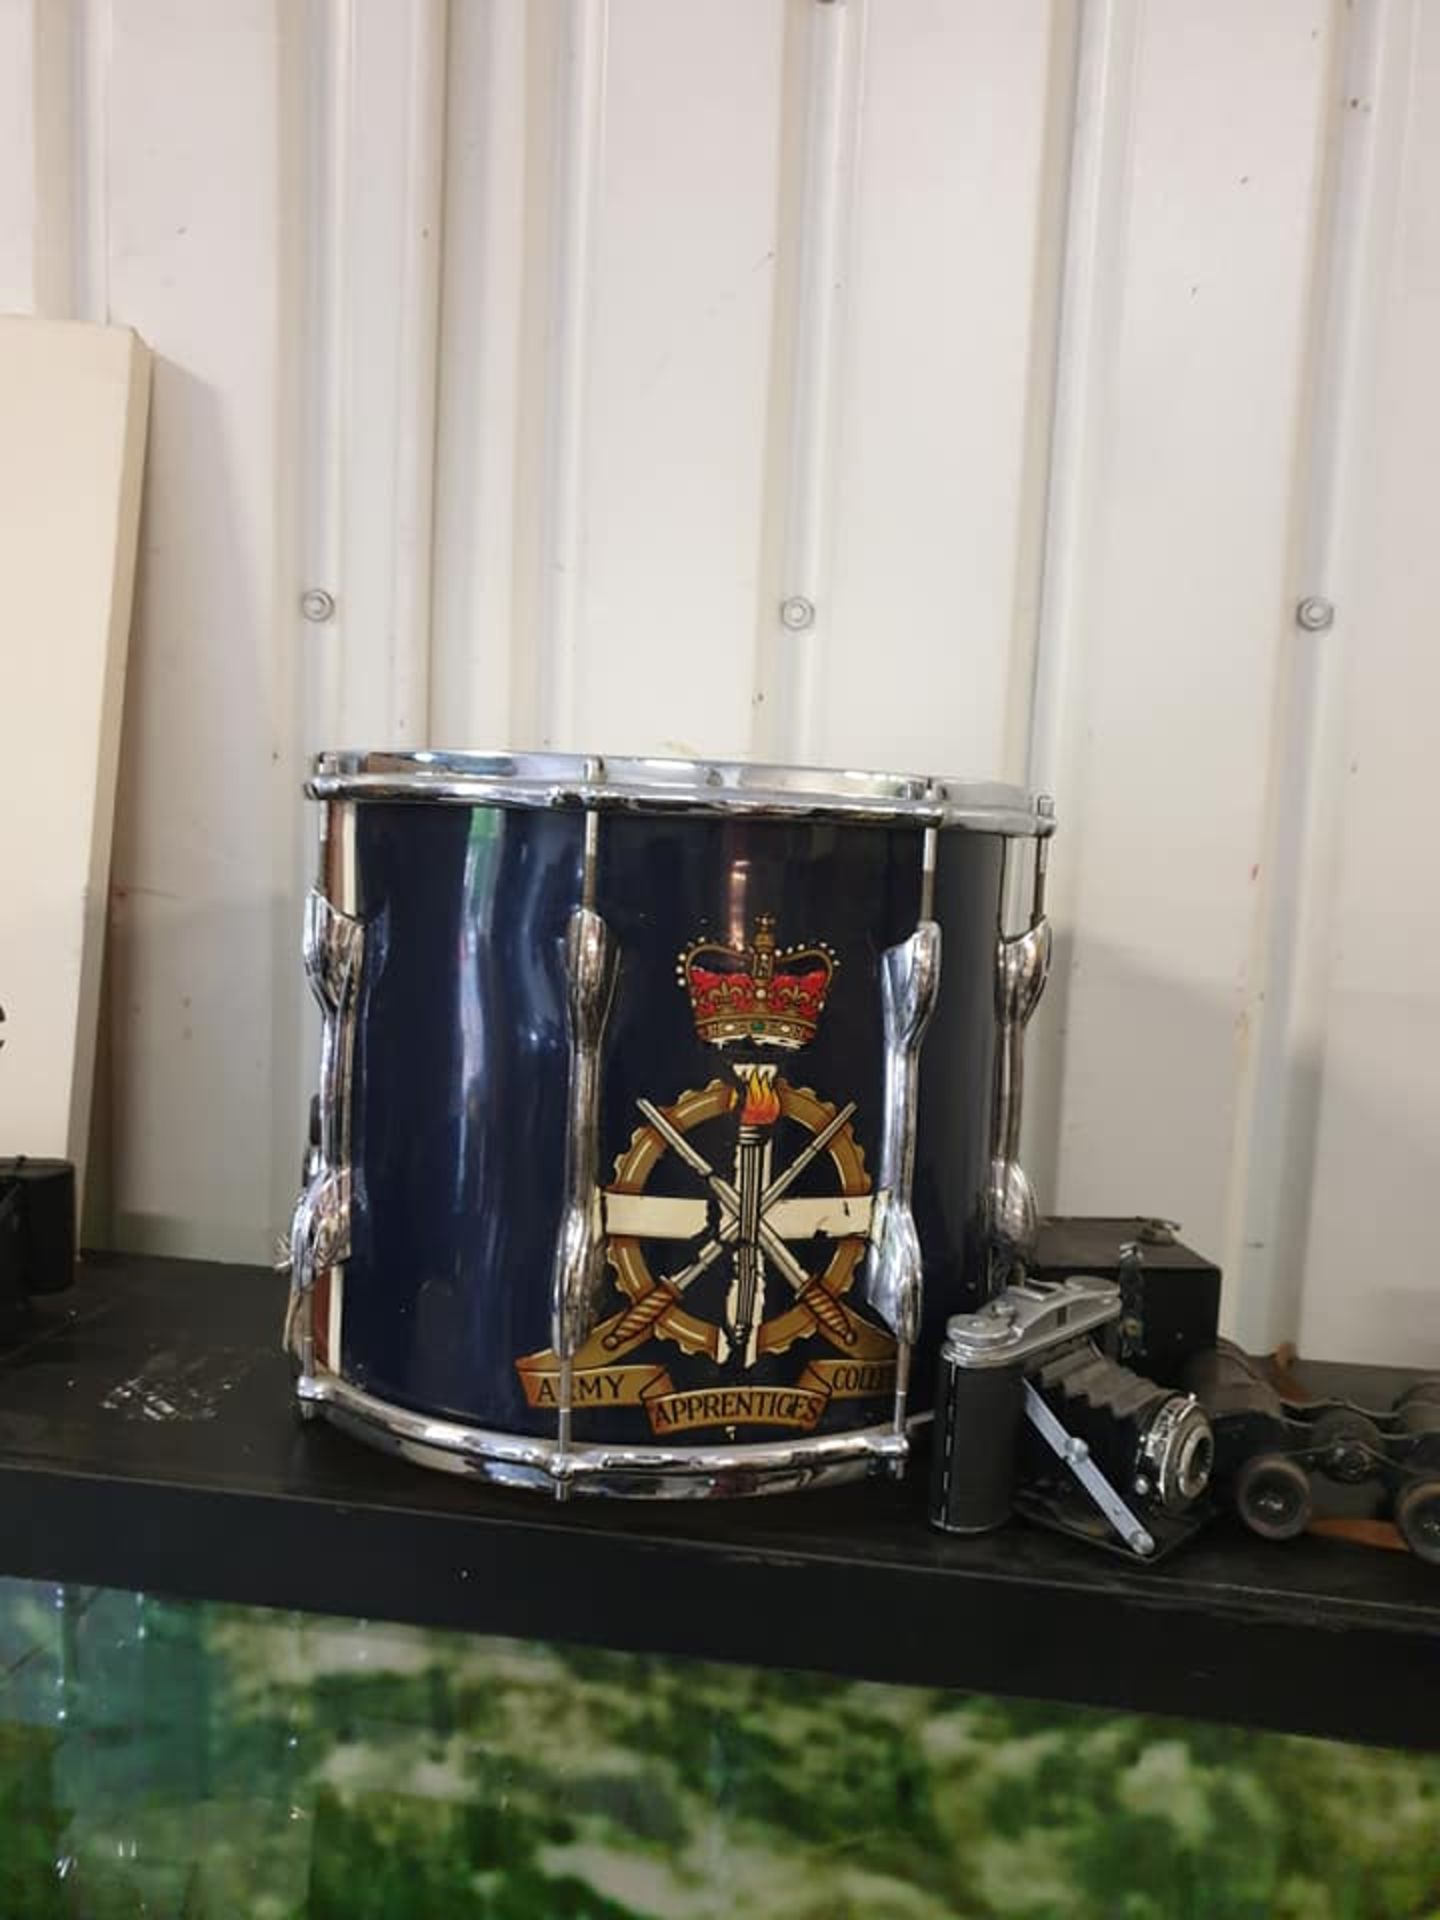 A Military Premier Heavy Duty Side Drum From The Army Apprentices College 35 x 31cm